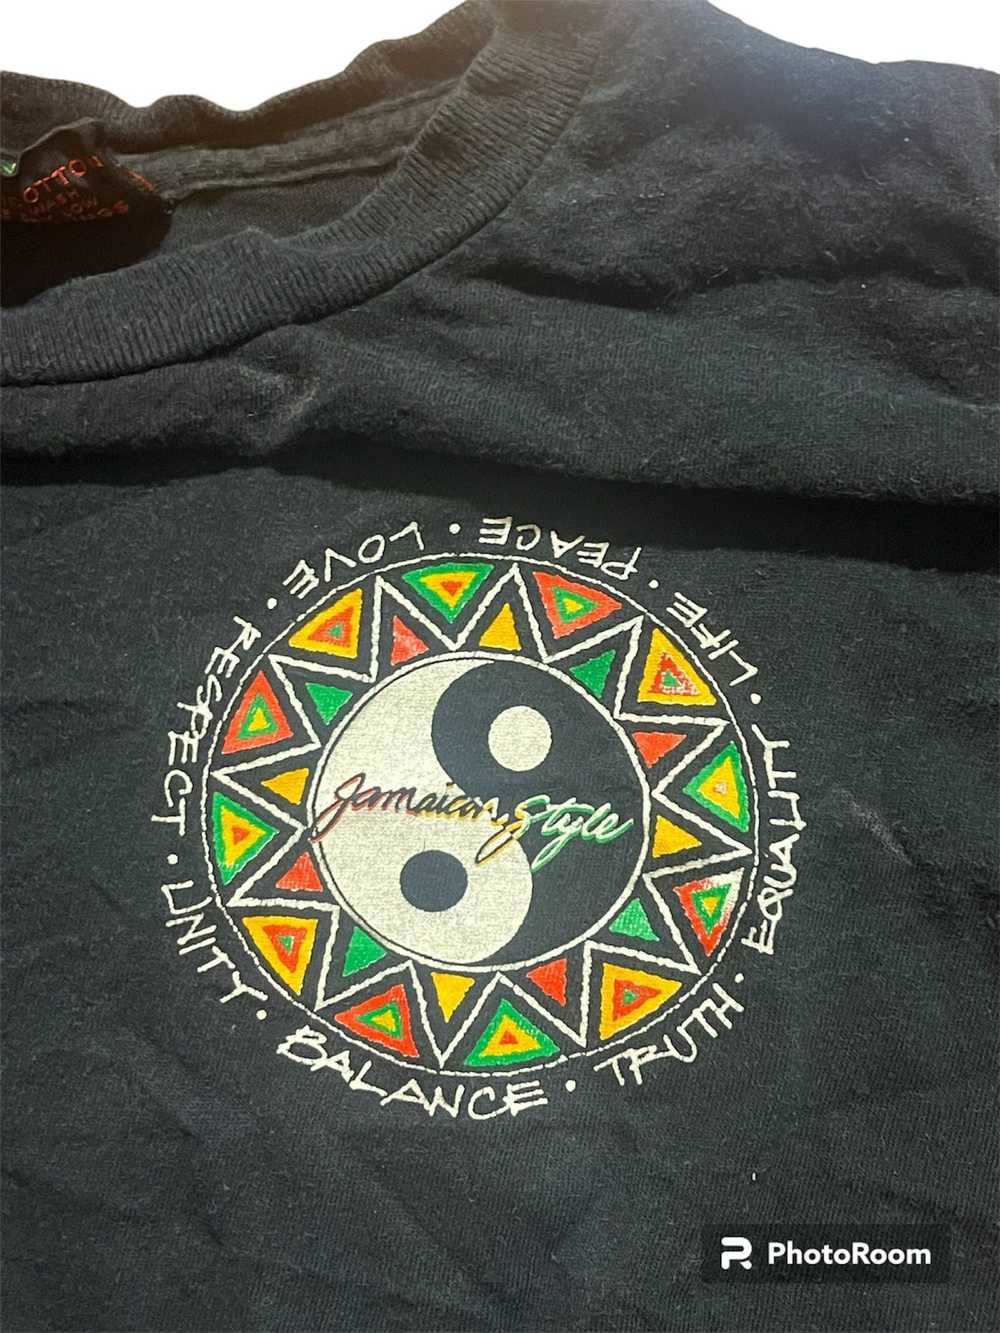 Vintage 1990s Jamaican style t shirt. - image 3